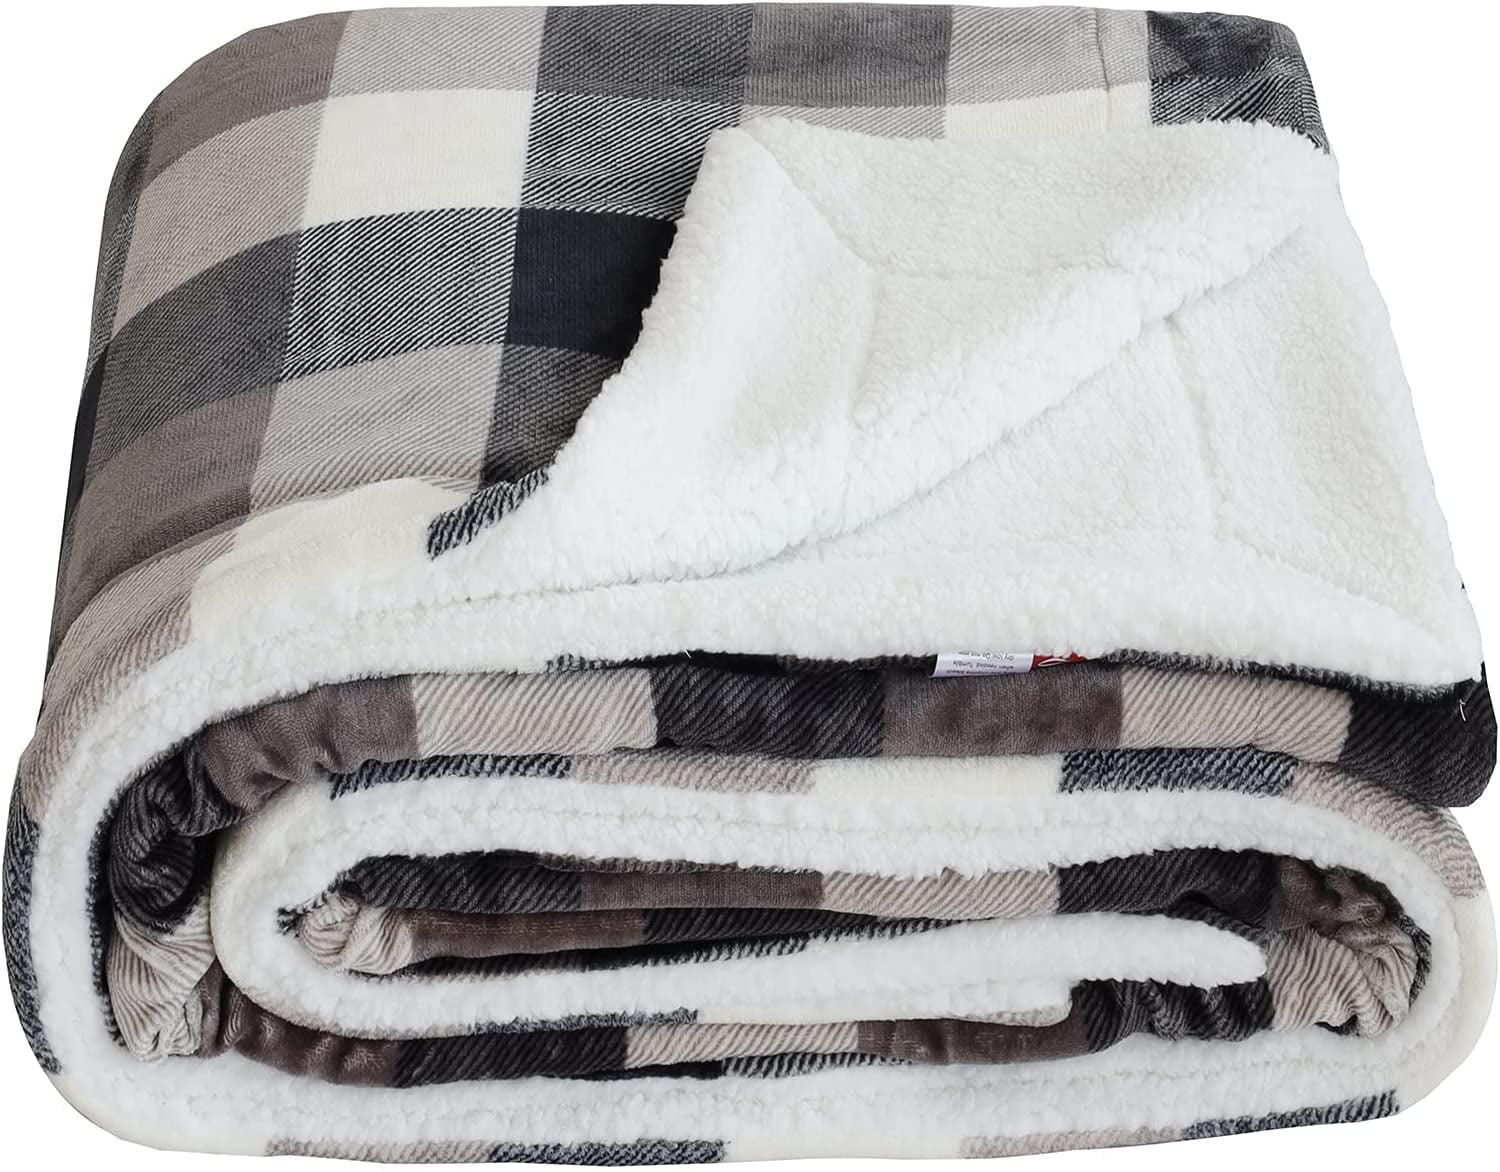 SOCHOW Sherpa Plaid Fleece Throw Blanket Double-Sided Super Soft Luxurious Bedding Blanket 60 x 80 inches Red/Grey